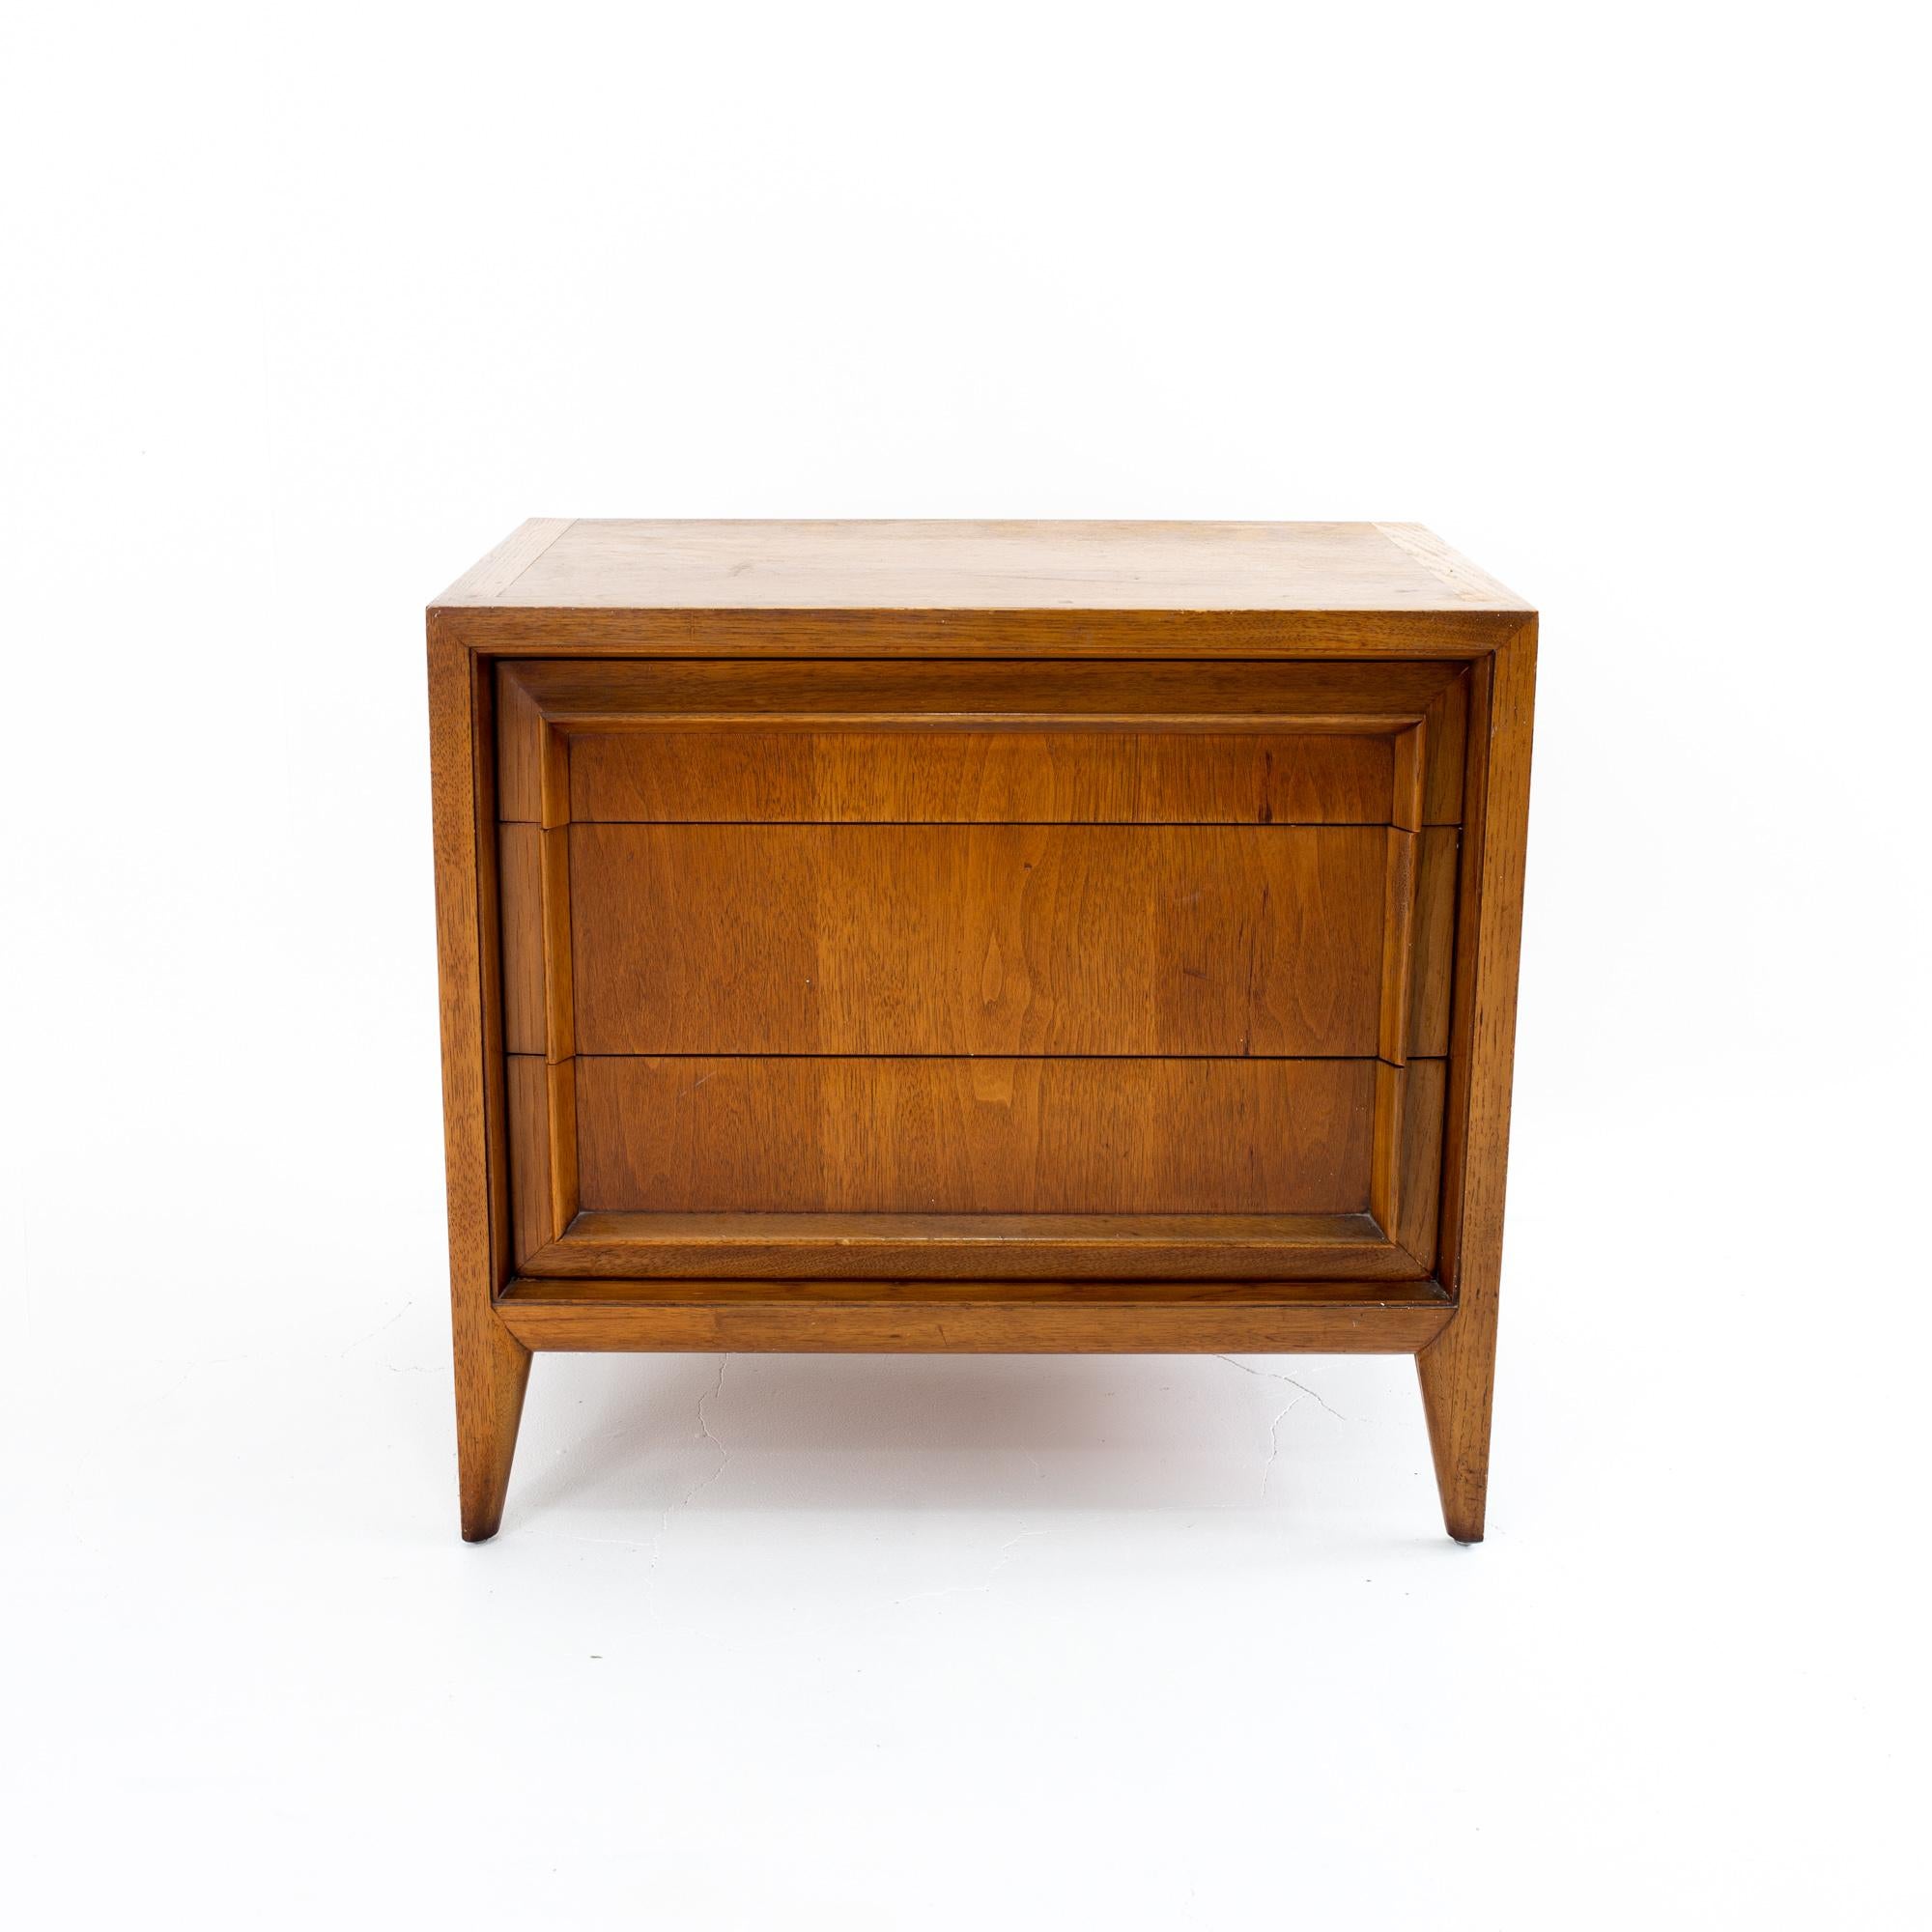 Century Furniture Mid Century walnut 2-drawer nightstand
Nightstand is 26 wide x 18 deep x 25 high

This price includes getting this piece in what we call restored vintage condition. That means the piece is permanently fixed upon purchase so it’s